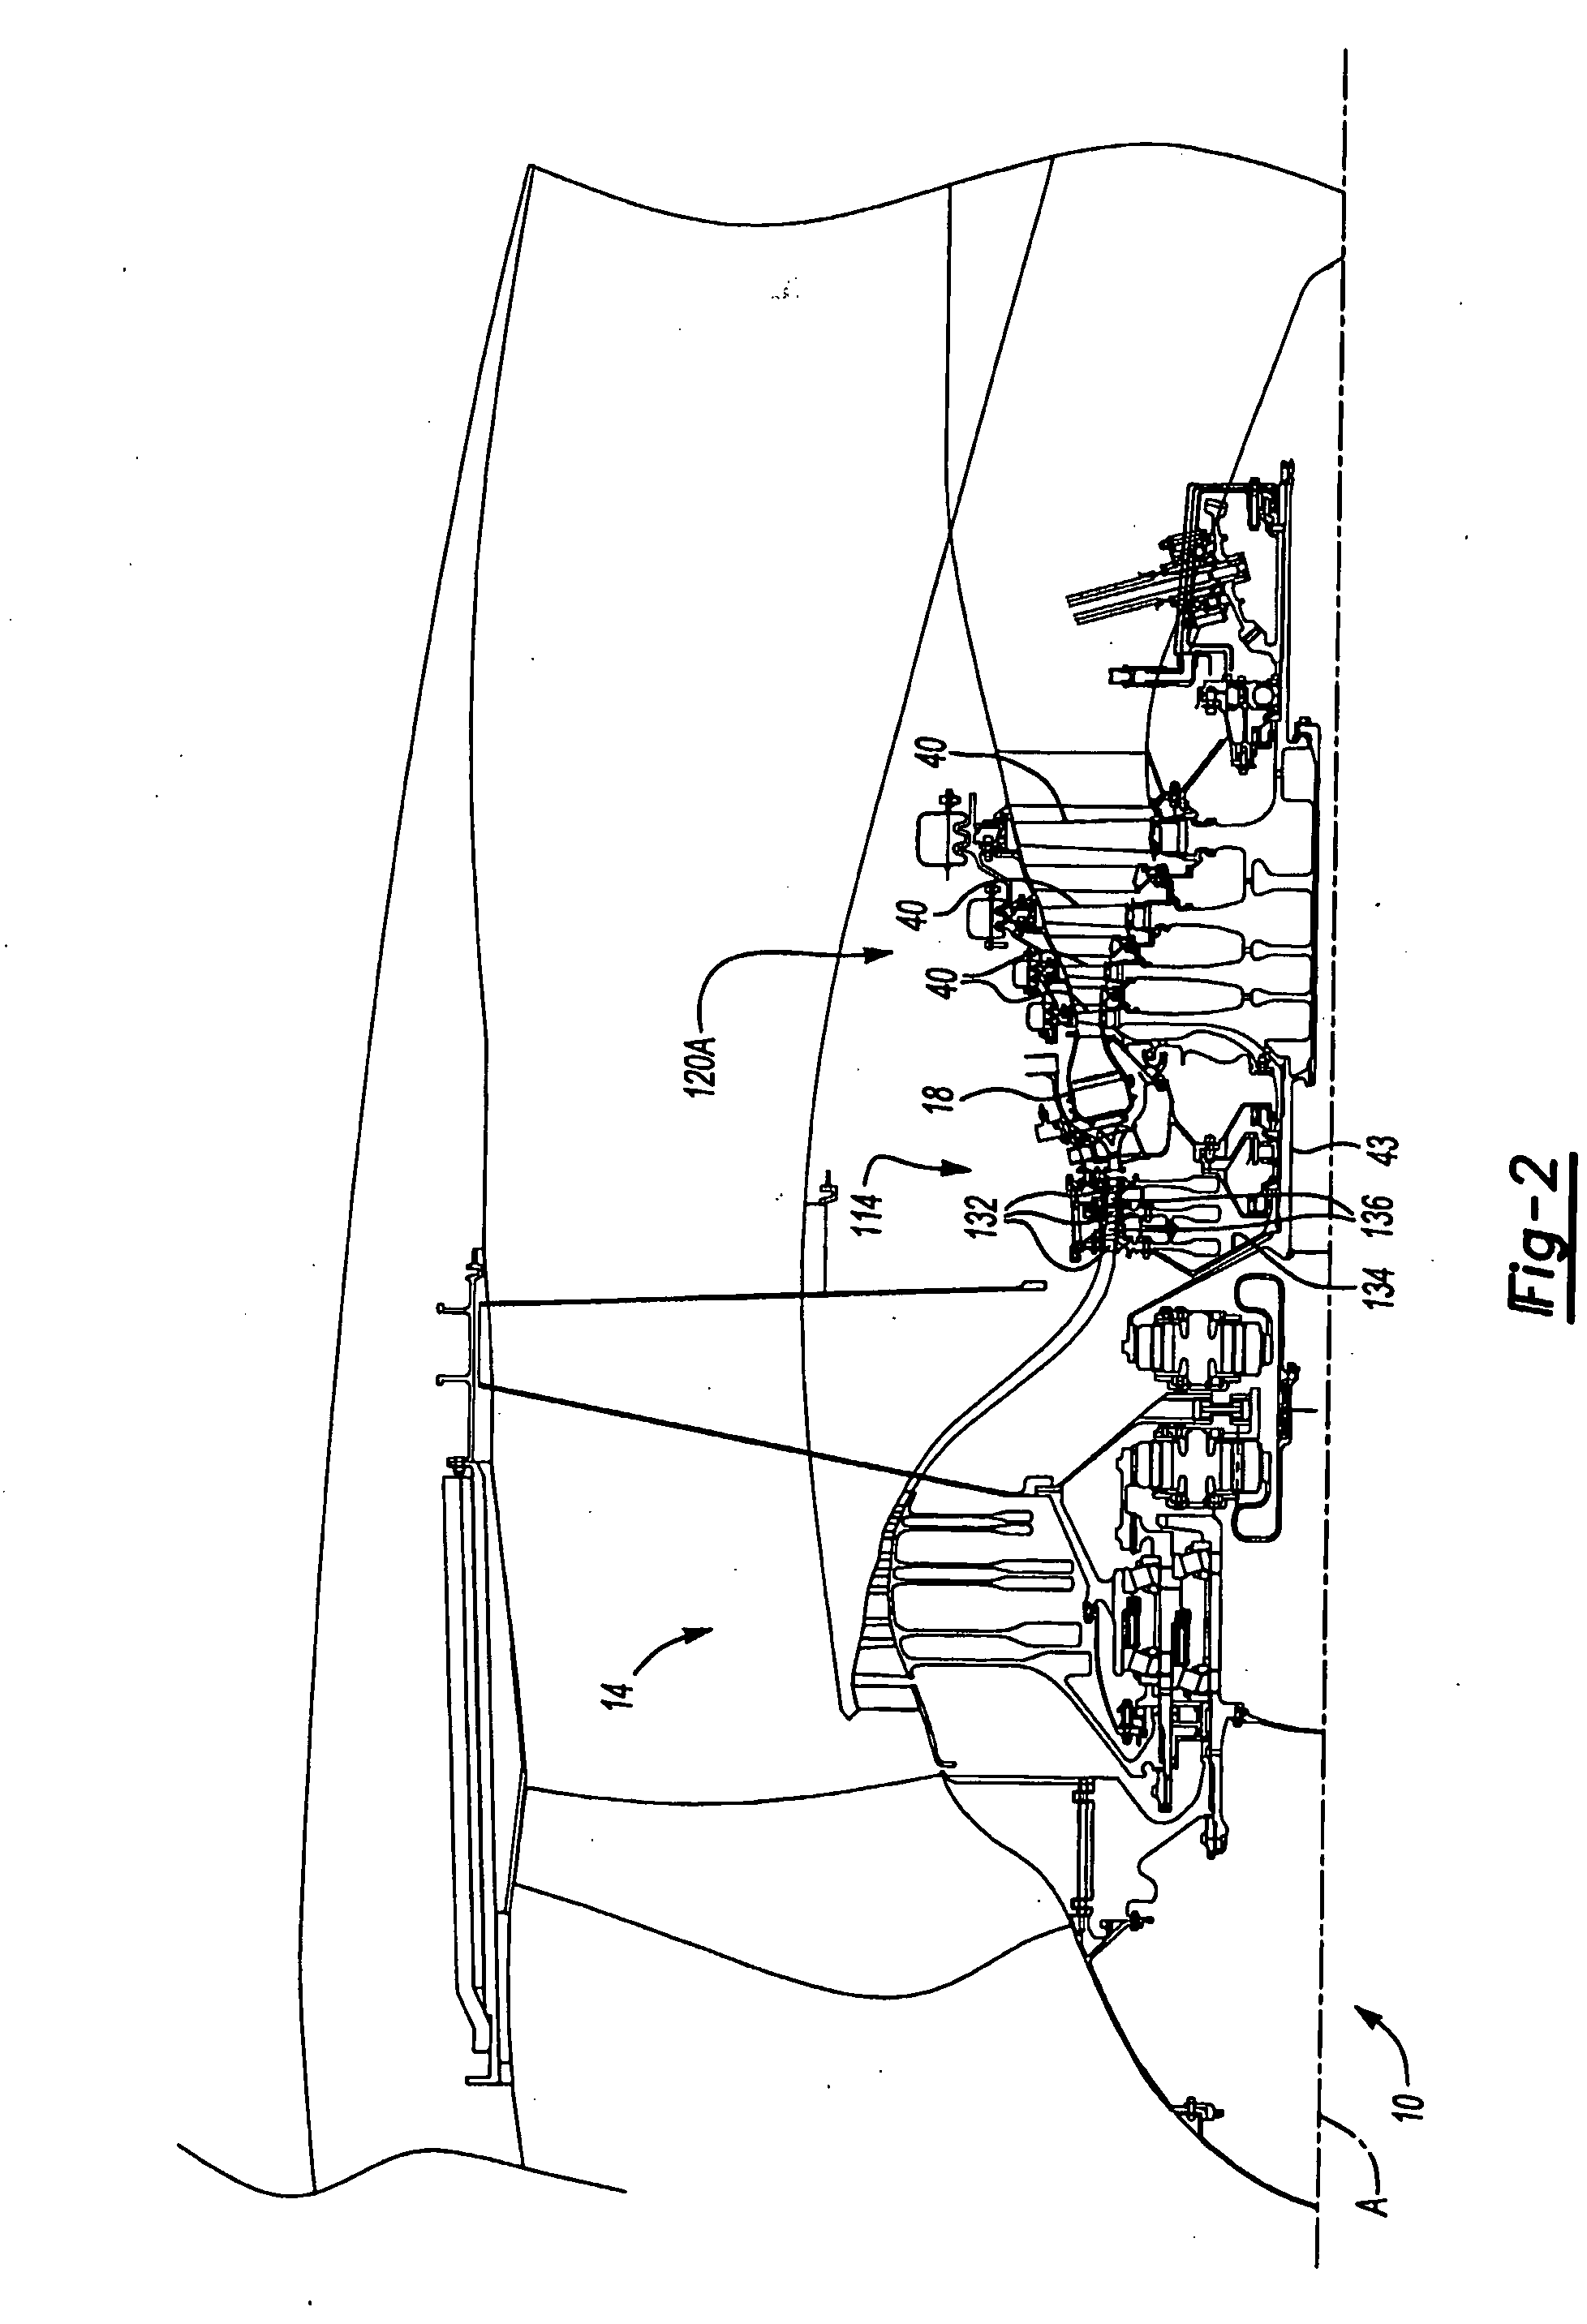 Turbine engine with differential gear driven fan and compressor